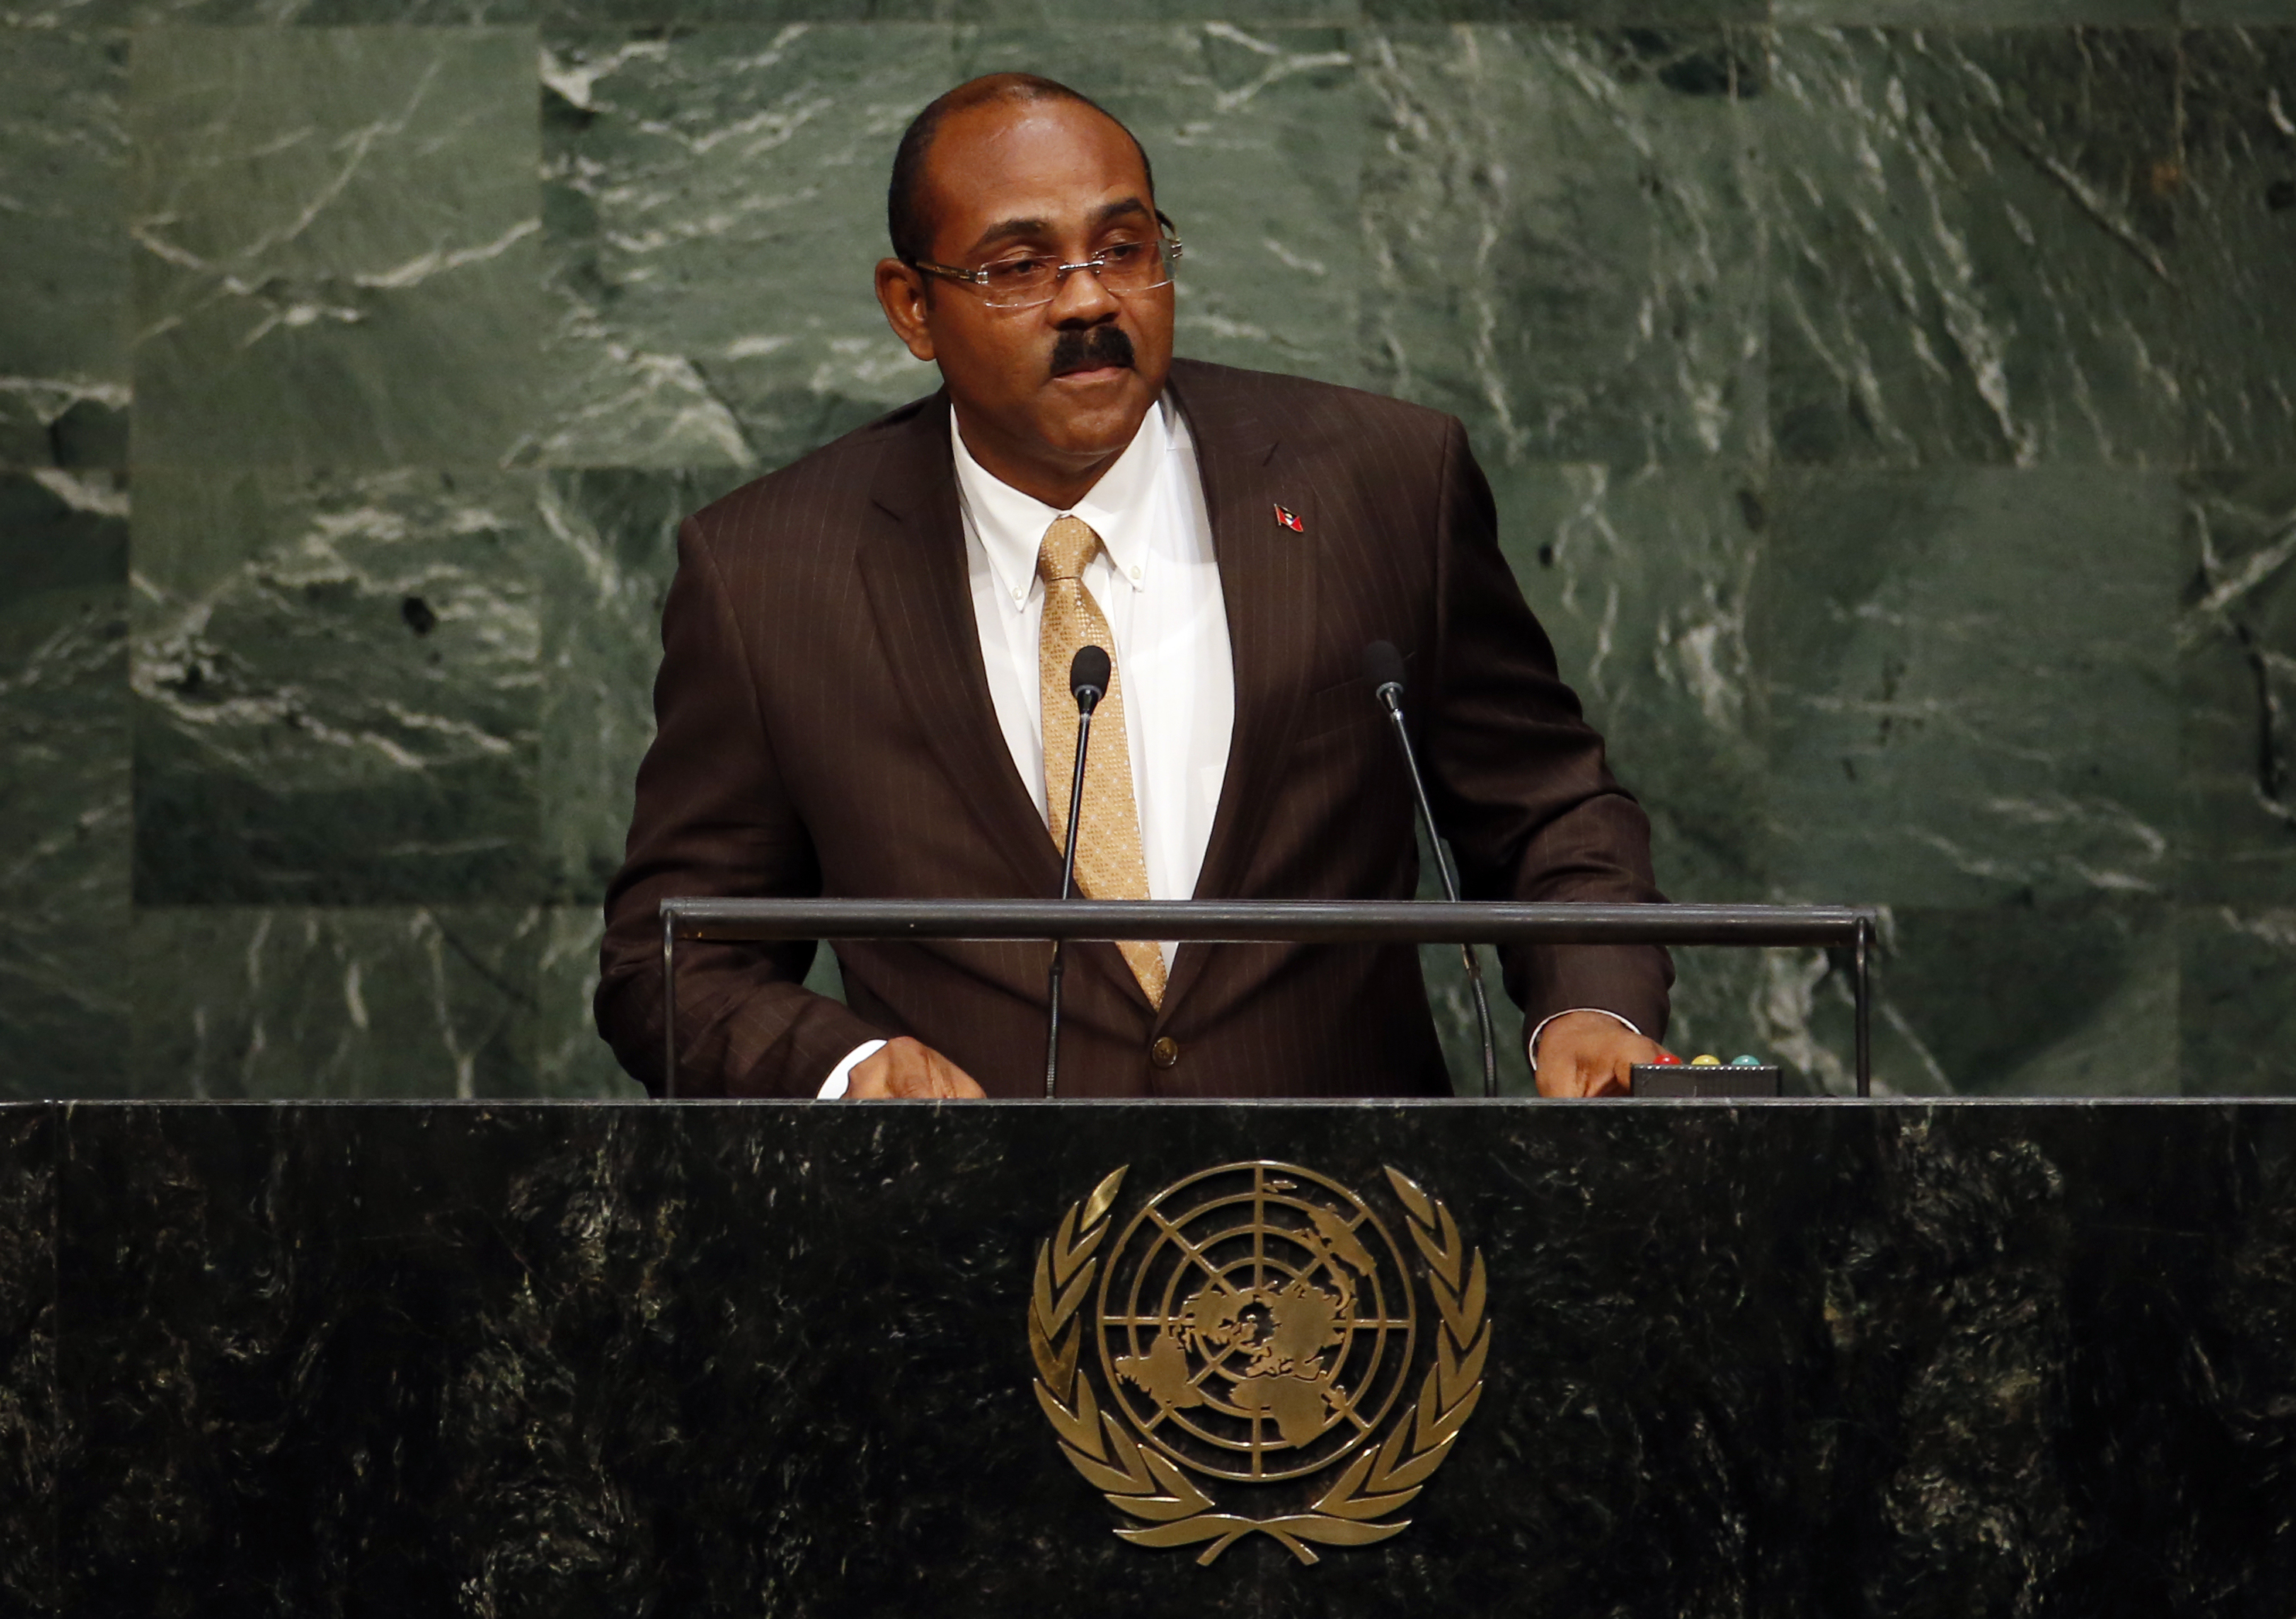 Prime Minister of Antigua and Barbuda Gaston Browne, whose government recently repealed criminal defamation